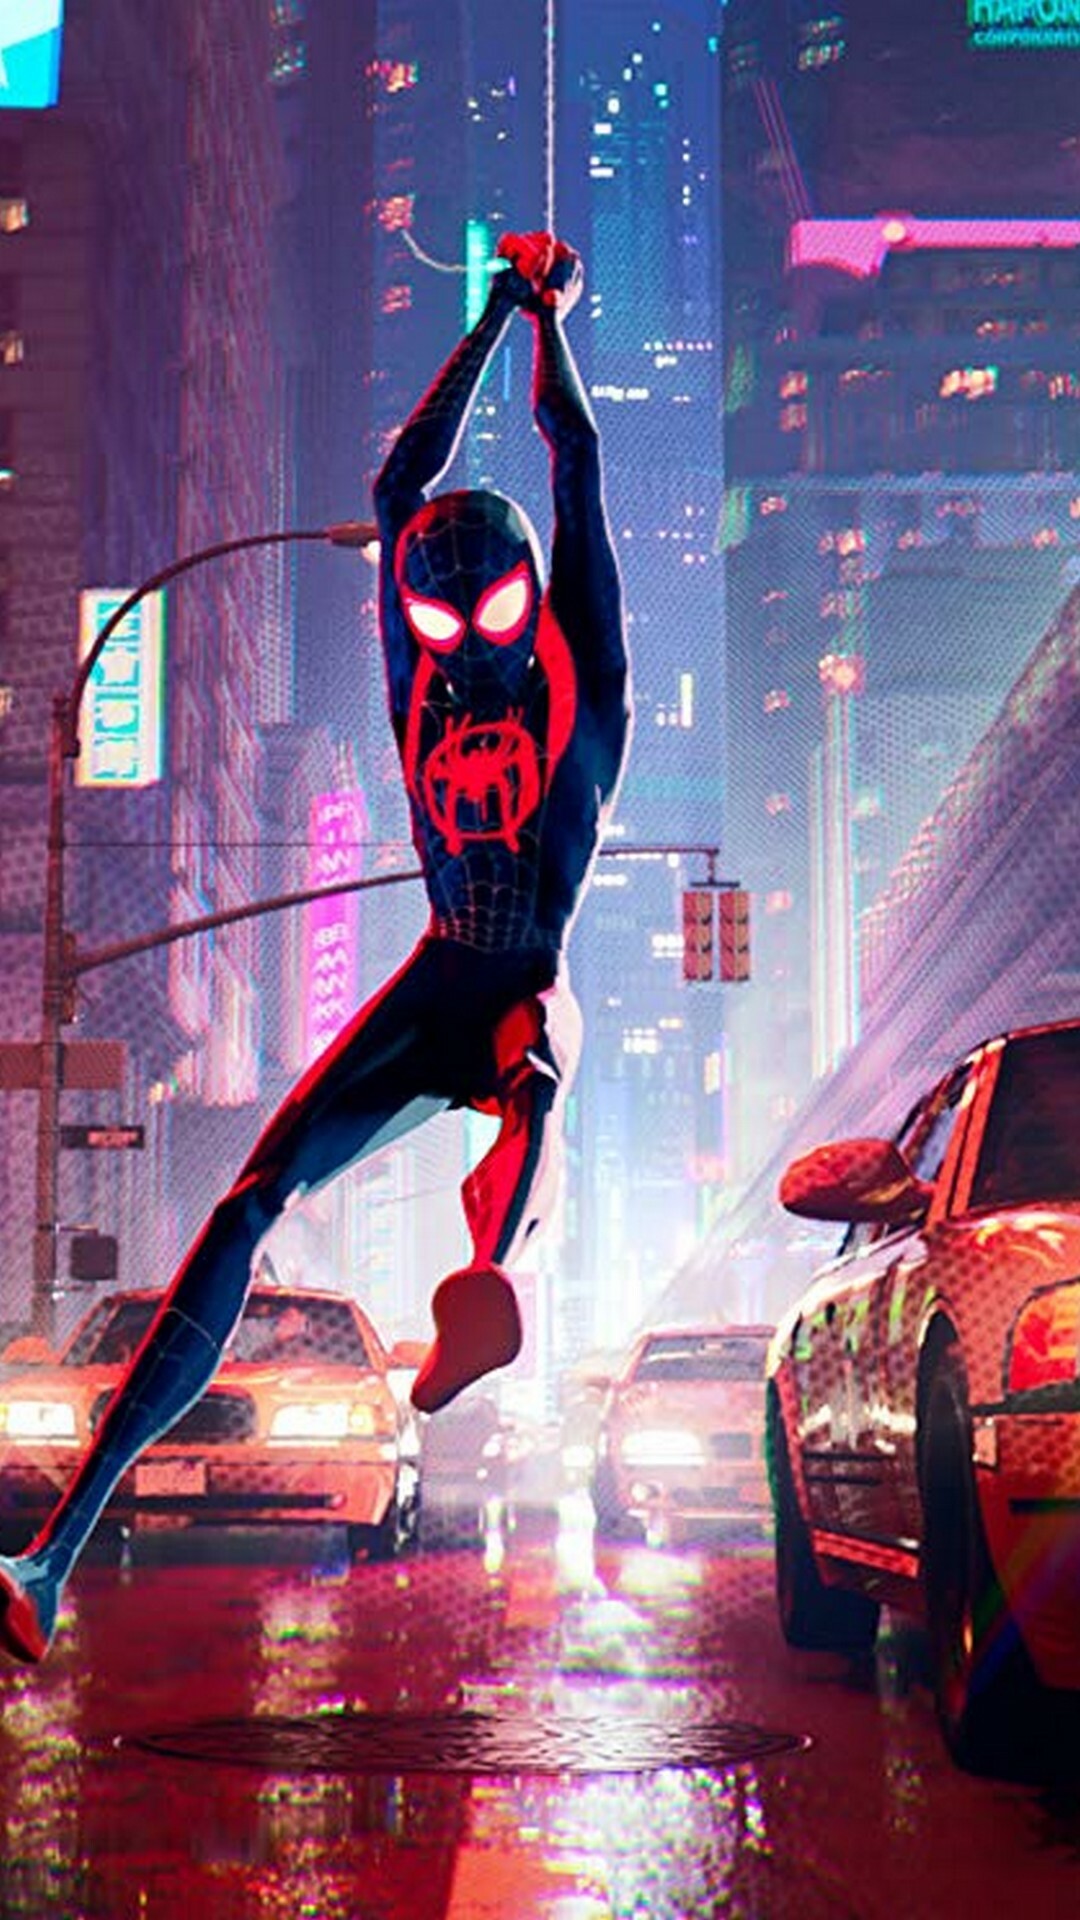 Spider-Man: Into the Spider-Verse: The film is based on the comic book characters created by writer Brian Michael Bendis and artist Sara Pichelli. 1080x1920 Full HD Background.